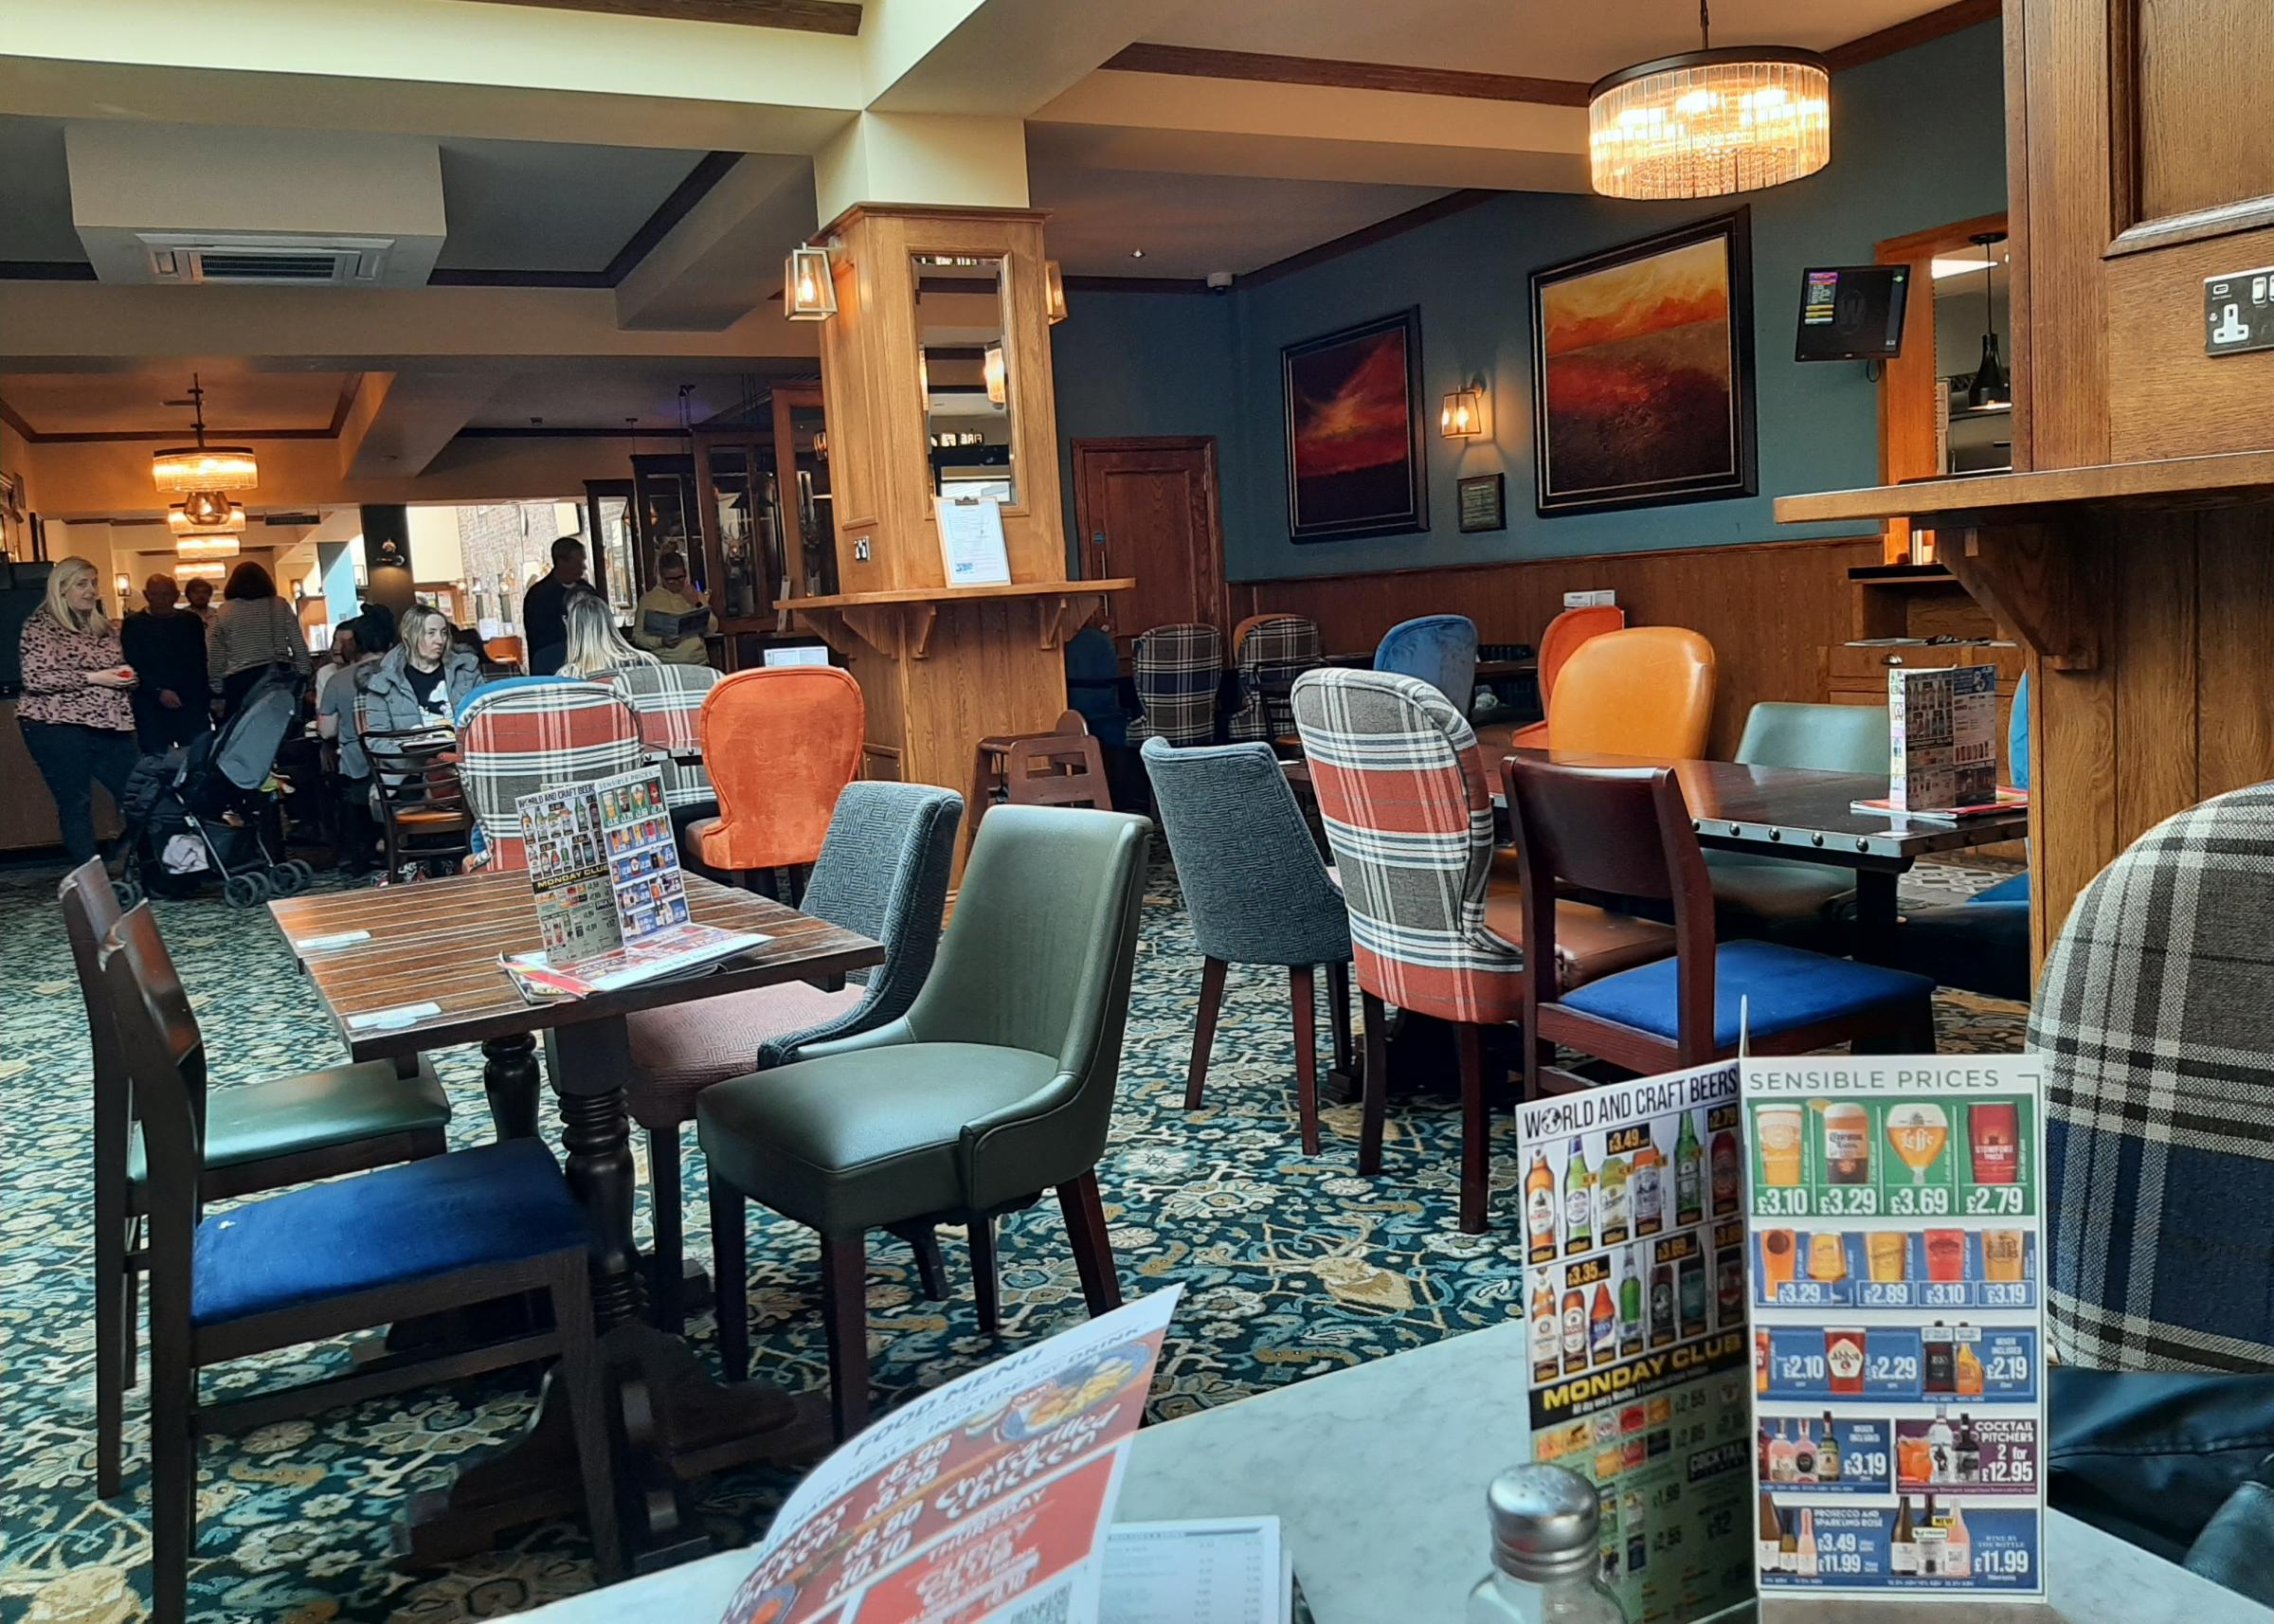 Inside The Buck, Northallertons relatively new Wetherspoons venue